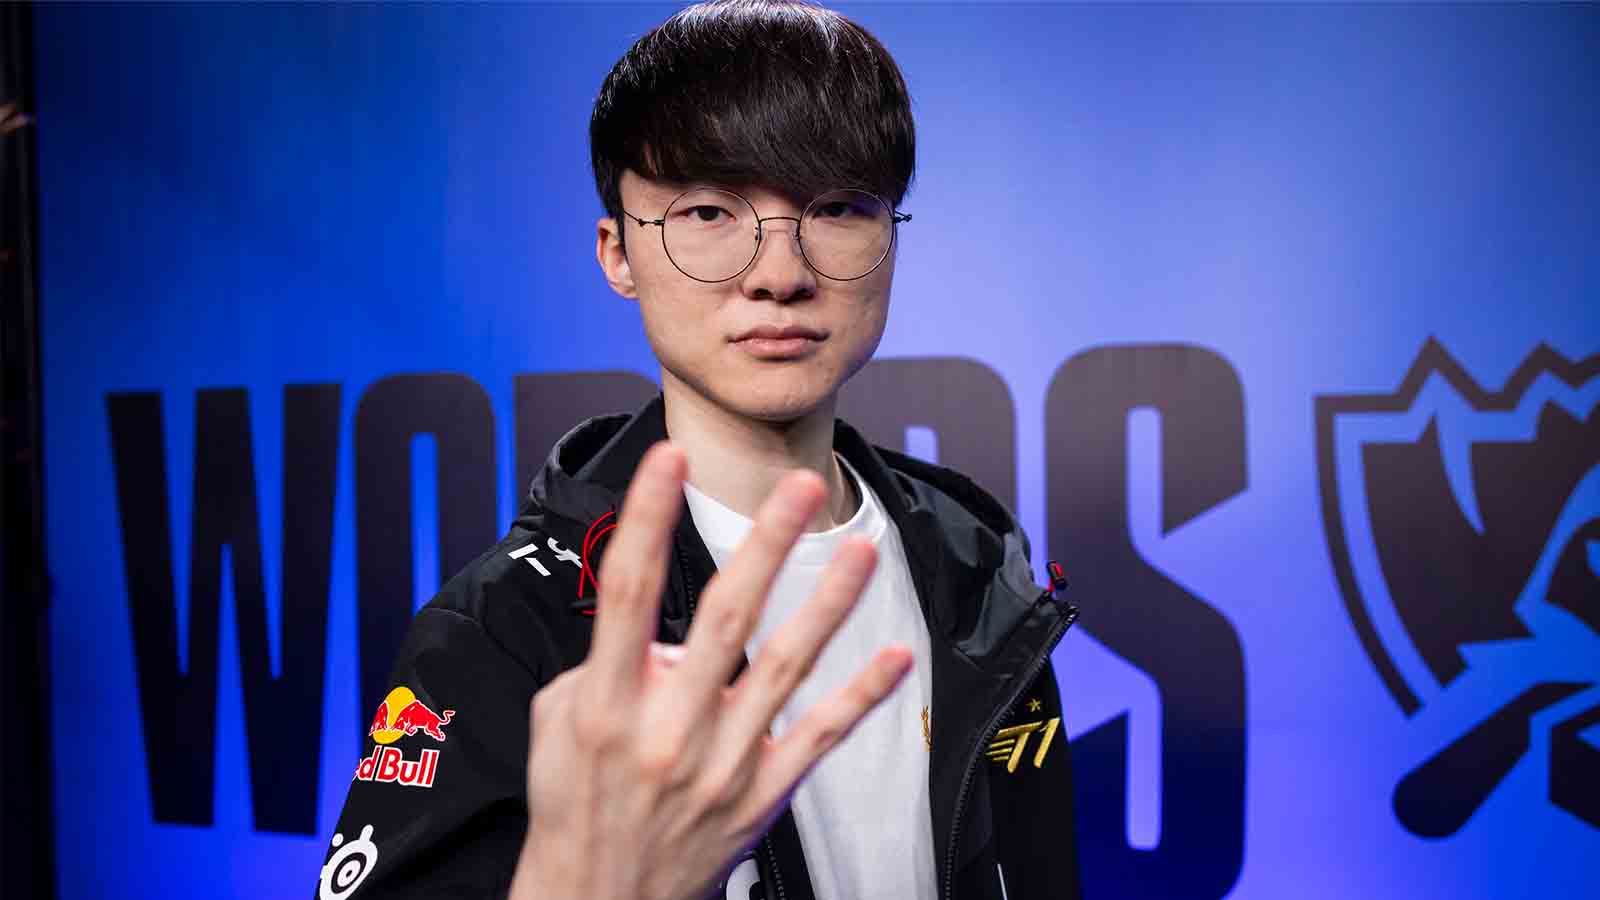 Faker’s Global Recognition: Ranked Alongside Messi and KSI by The Times